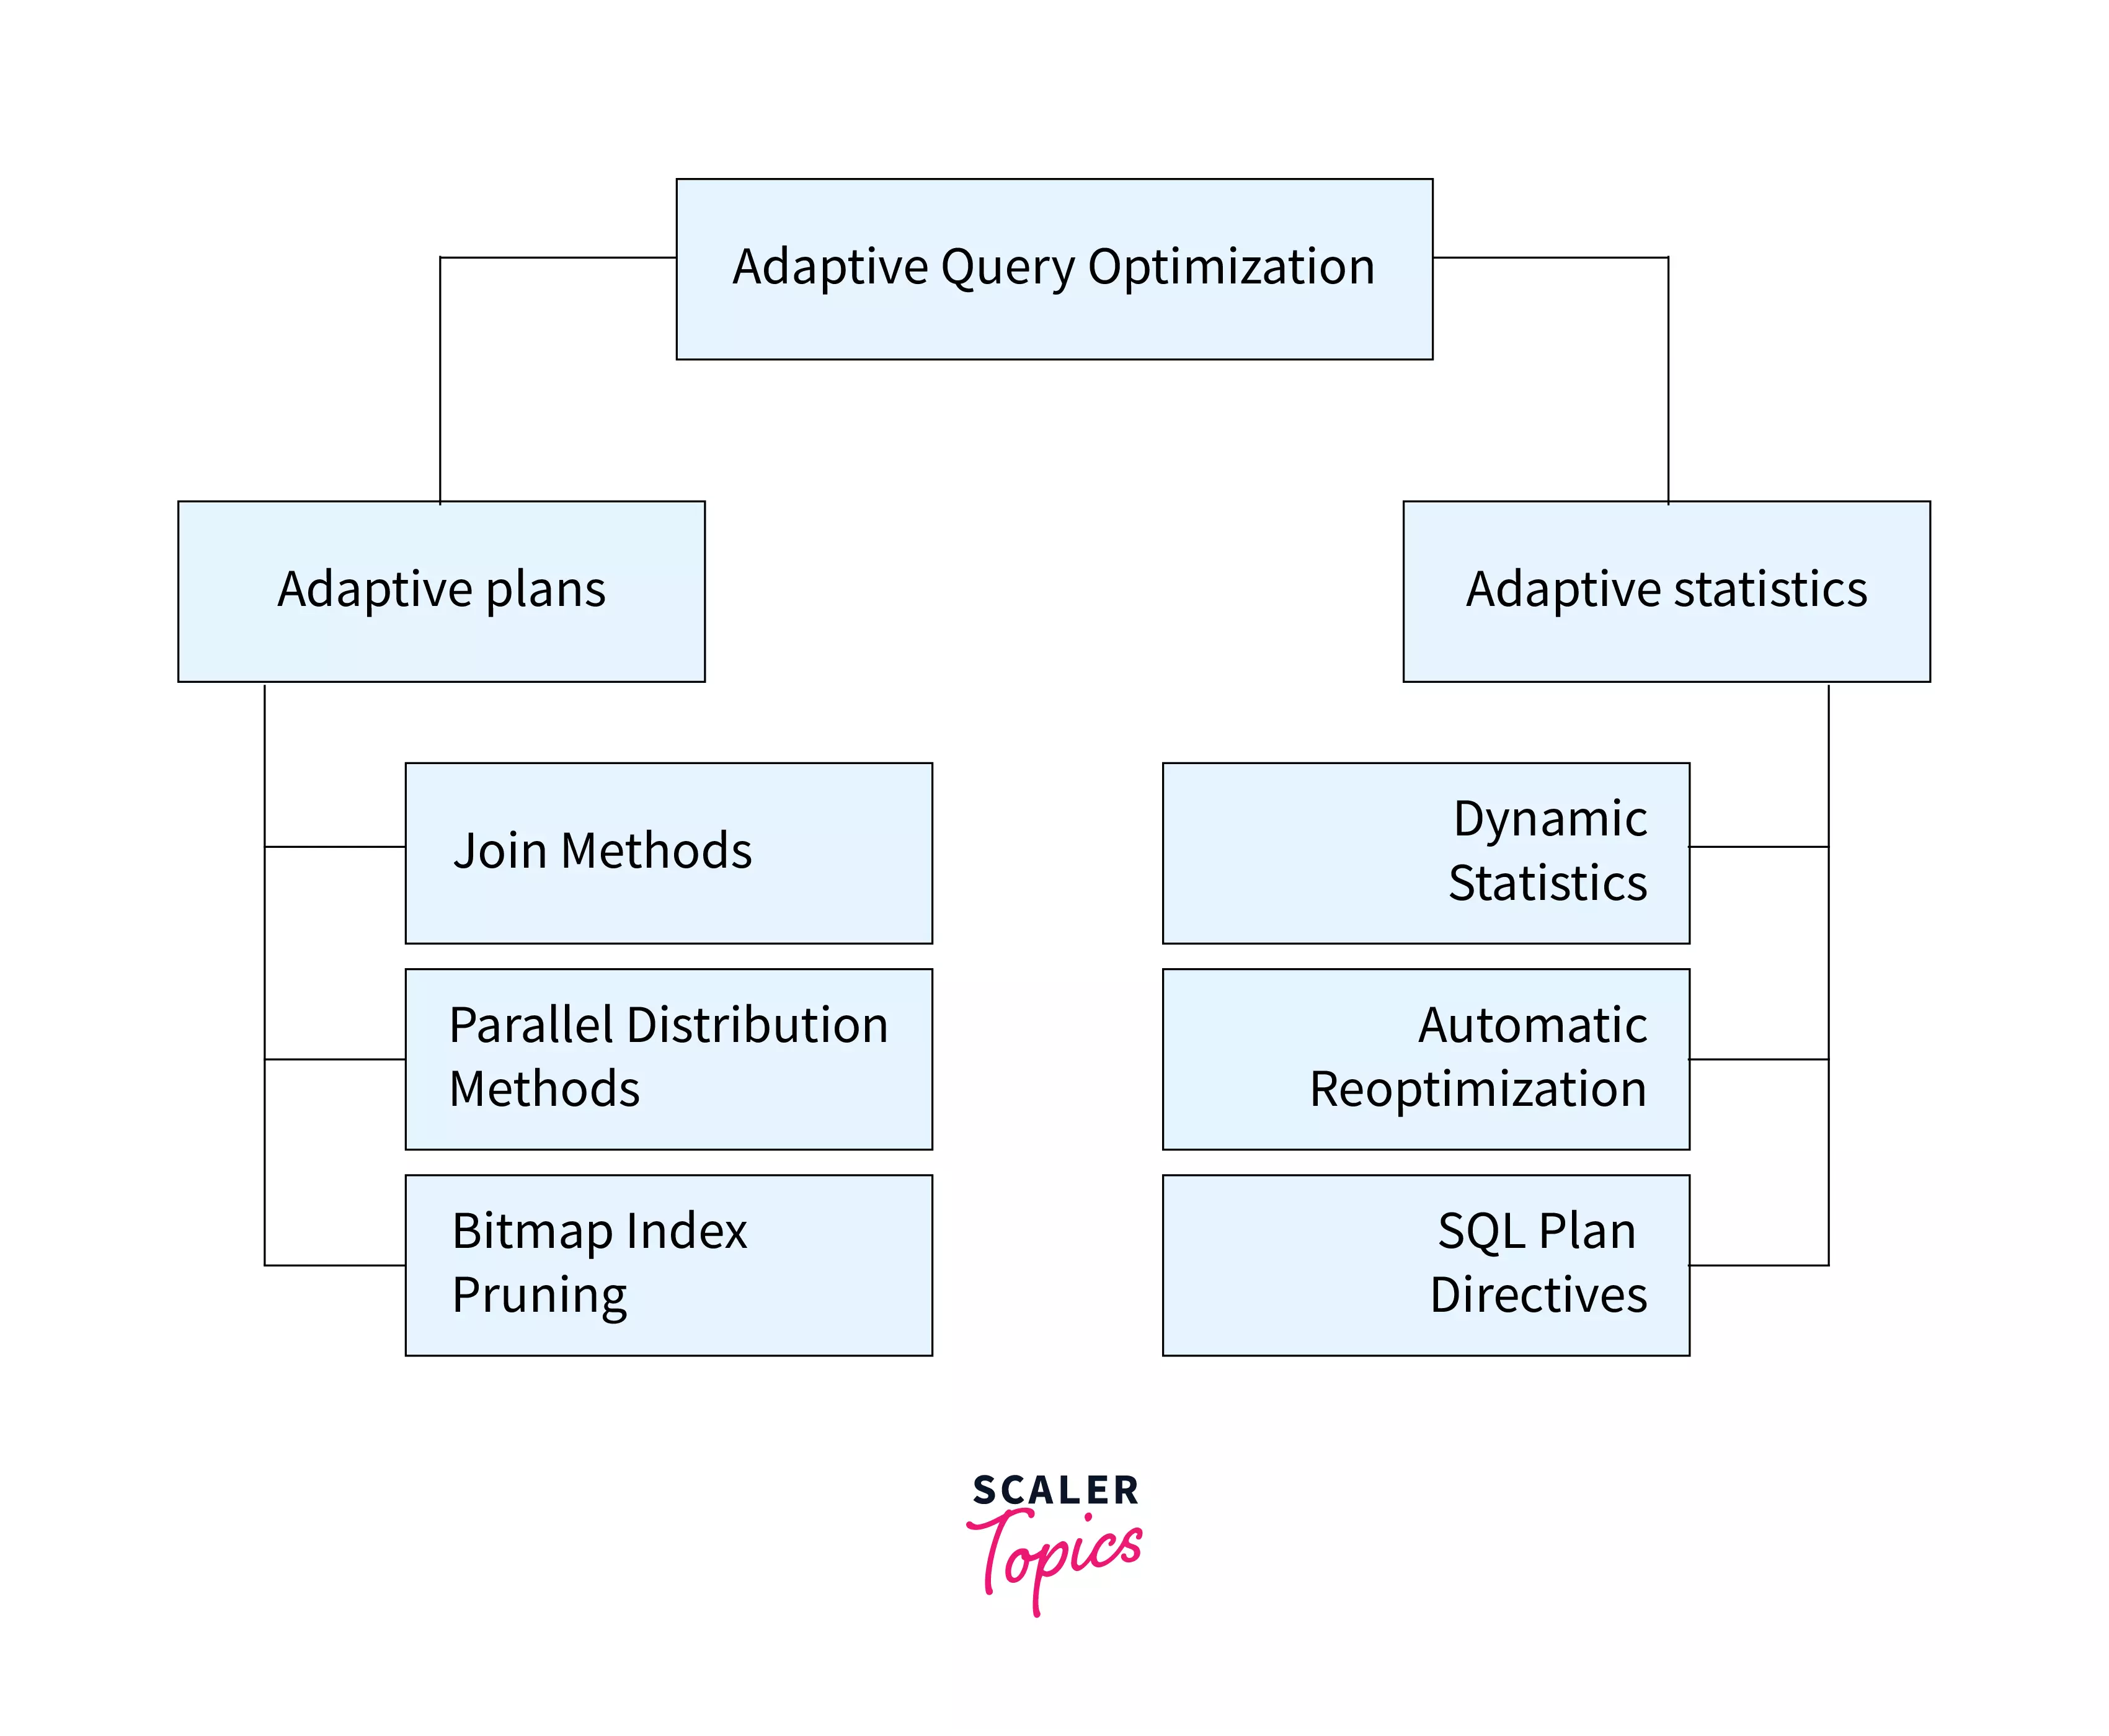 Adaptive Query Optimization in DBMS